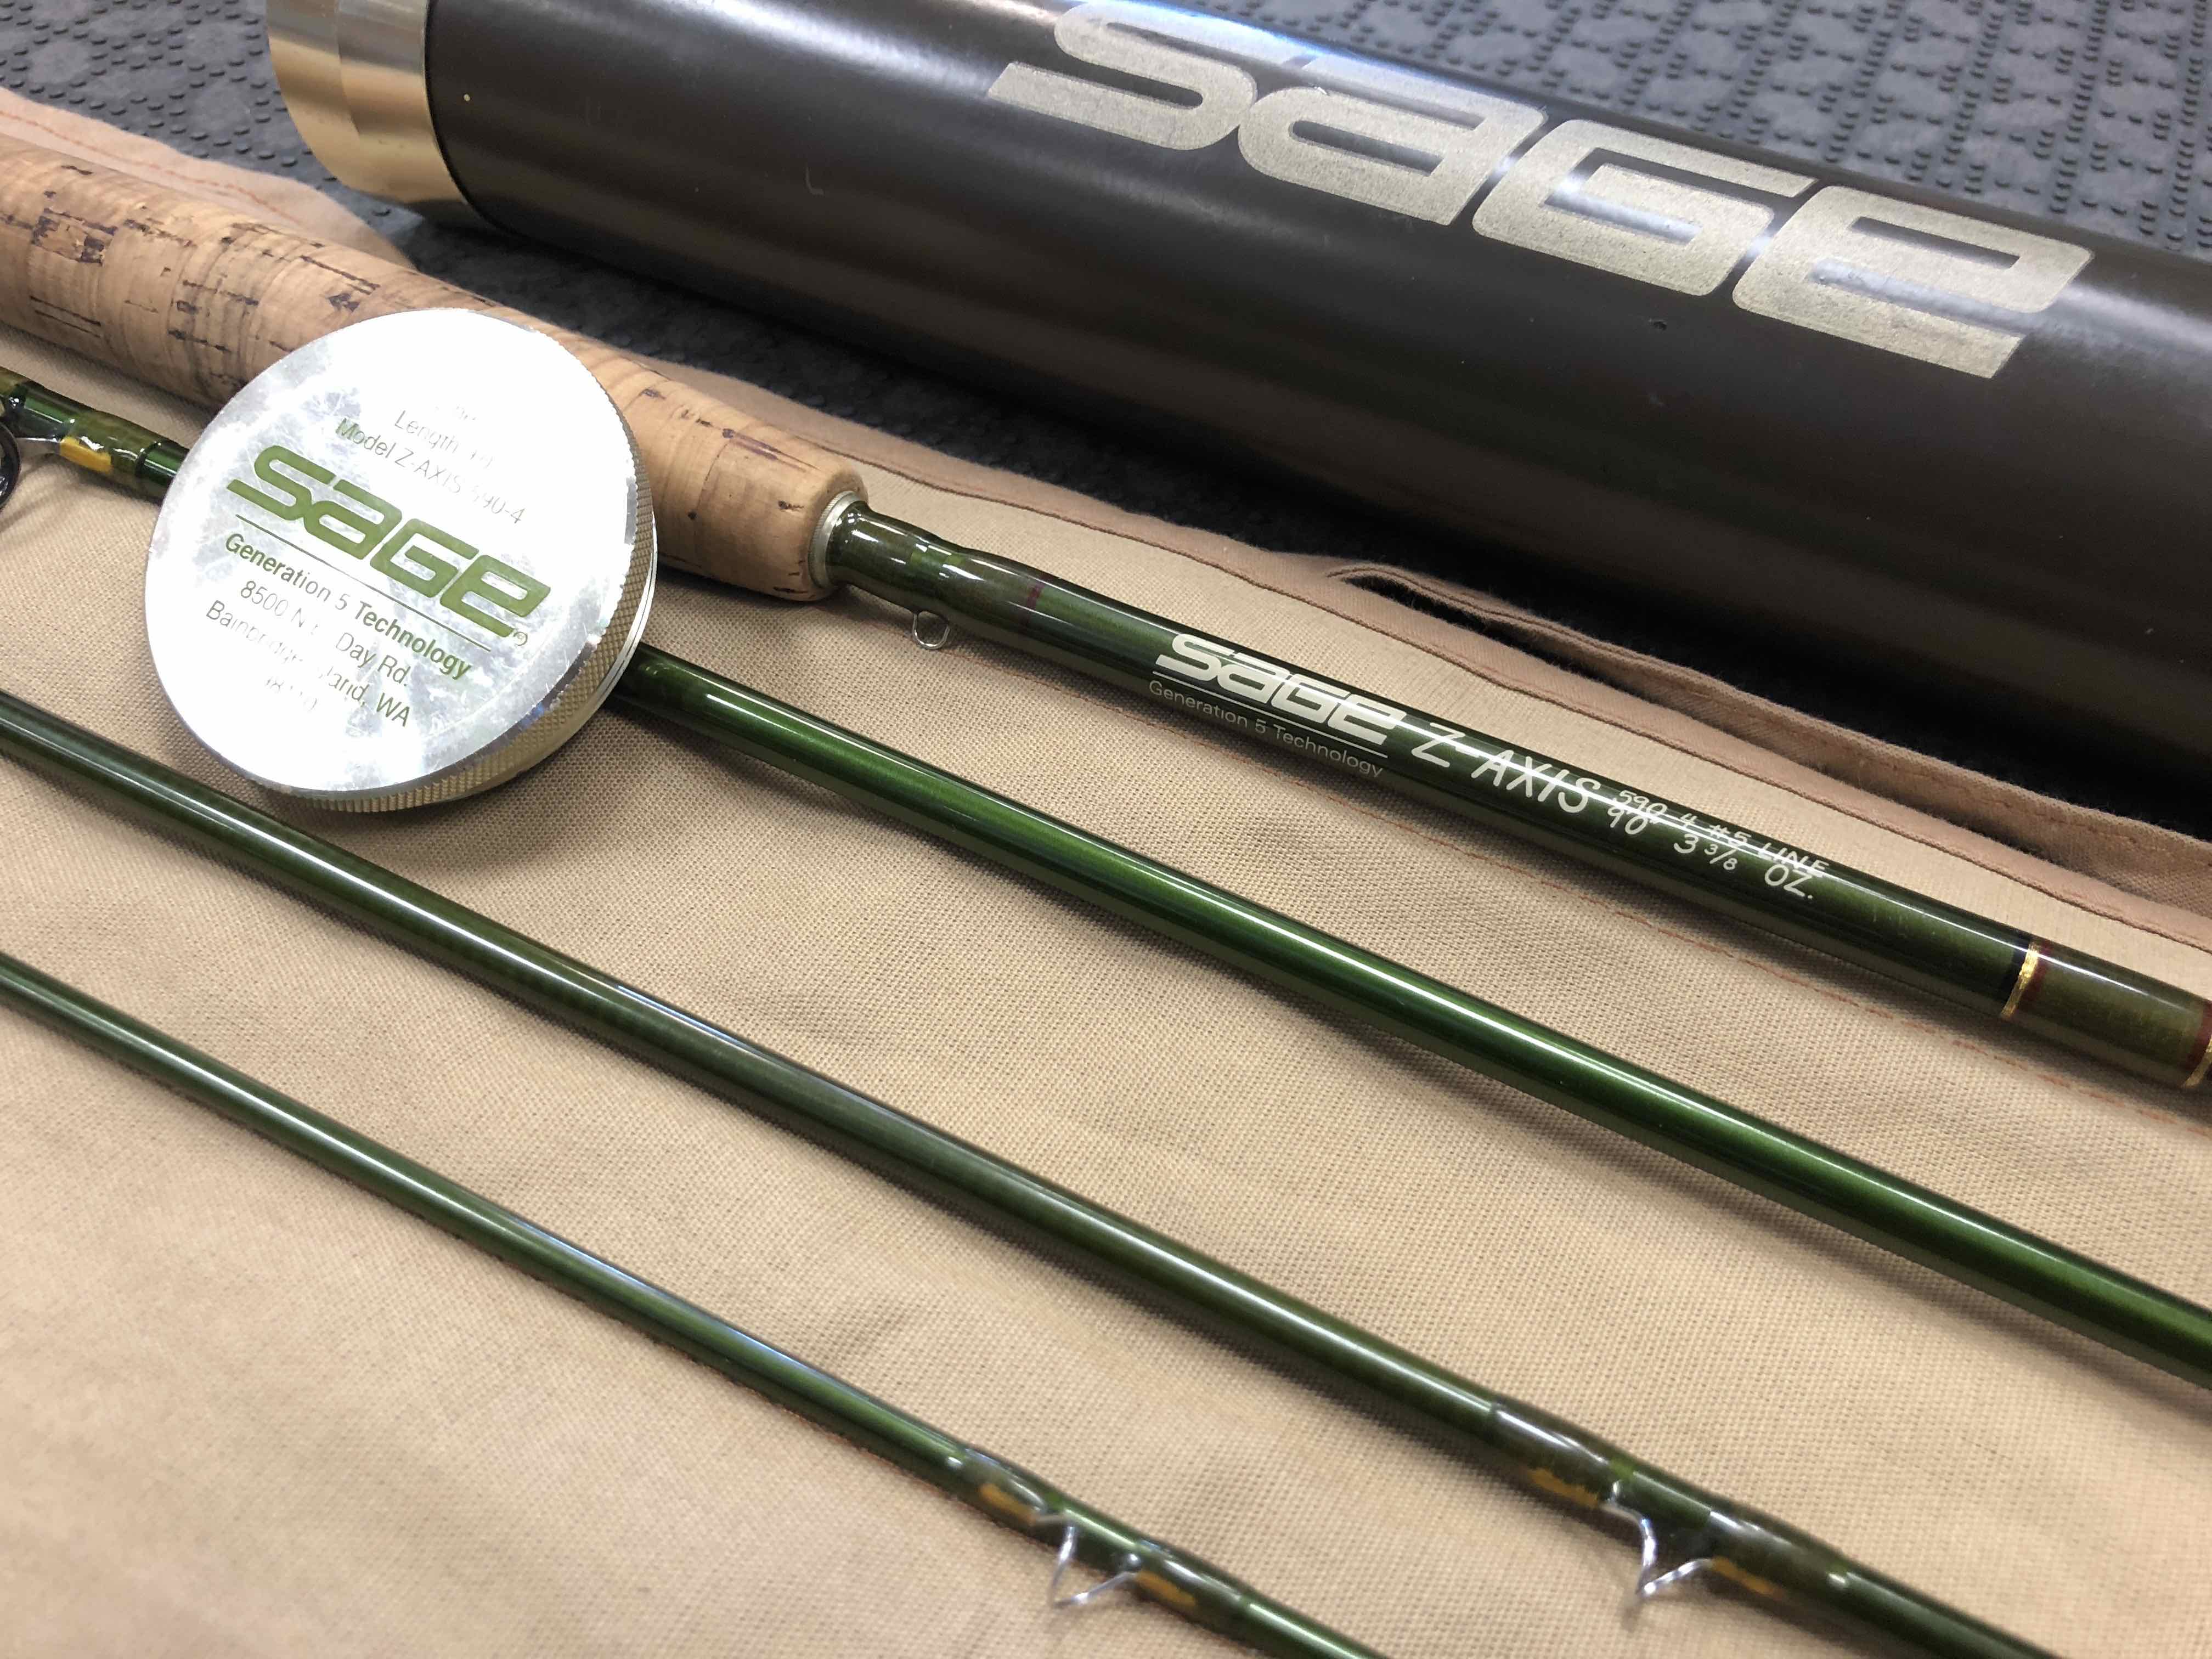 Sage Z Axis 590-4 - 4pc 5wt Fly Rod - GREAT SHAPE! - $350